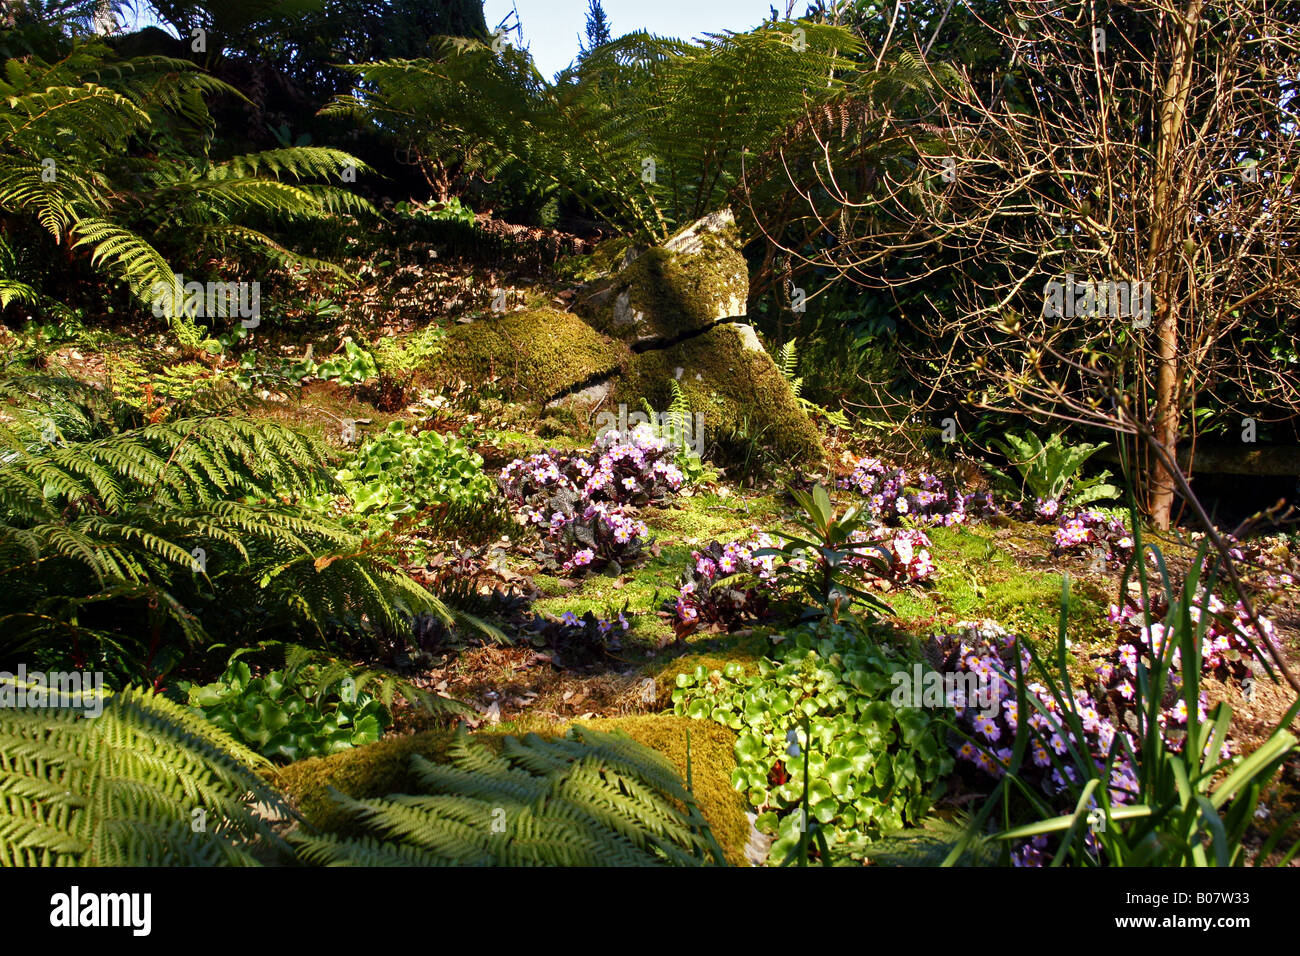 PRIMULAS AND FERNS GROWING ON A SHADY ROCKERY. Stock Photo